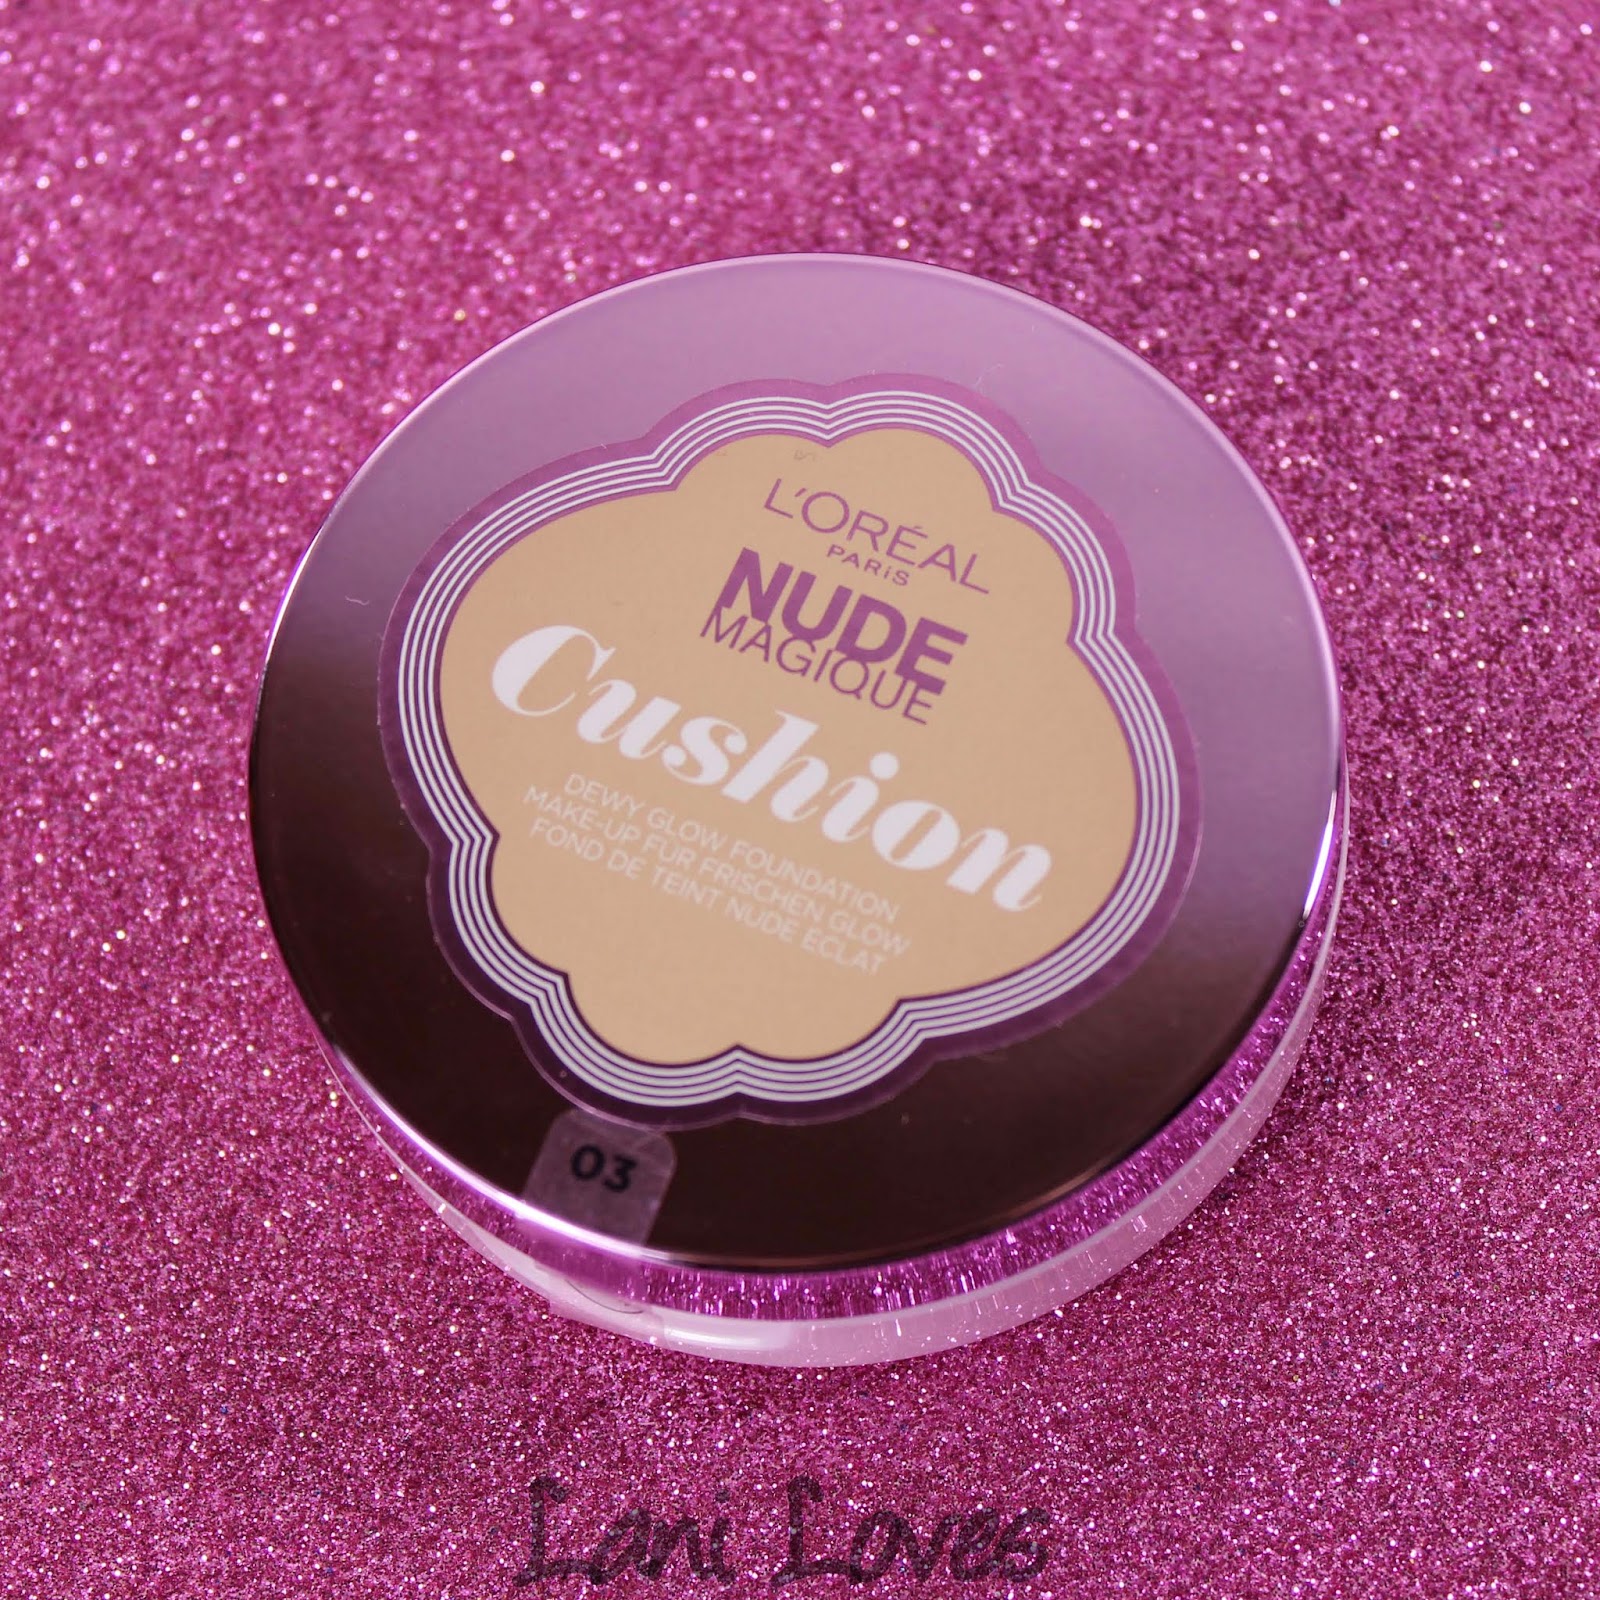 LOreal Nude Magique Cushion Foundation Review - Mammaful 